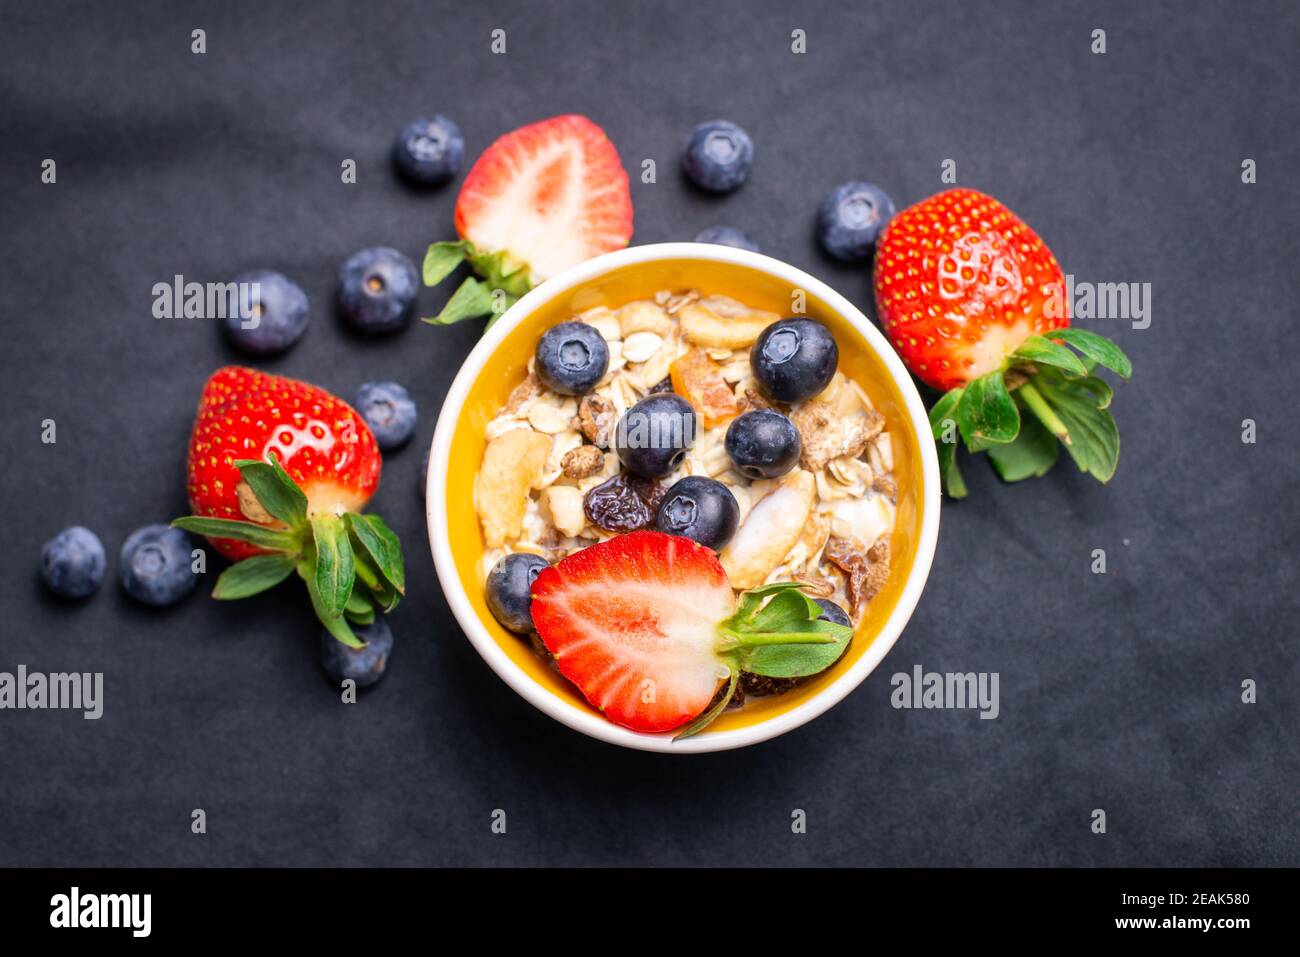 Fruit and Nut muesli with Strawberries and Blueberries. Organic Milk. Stock Photo